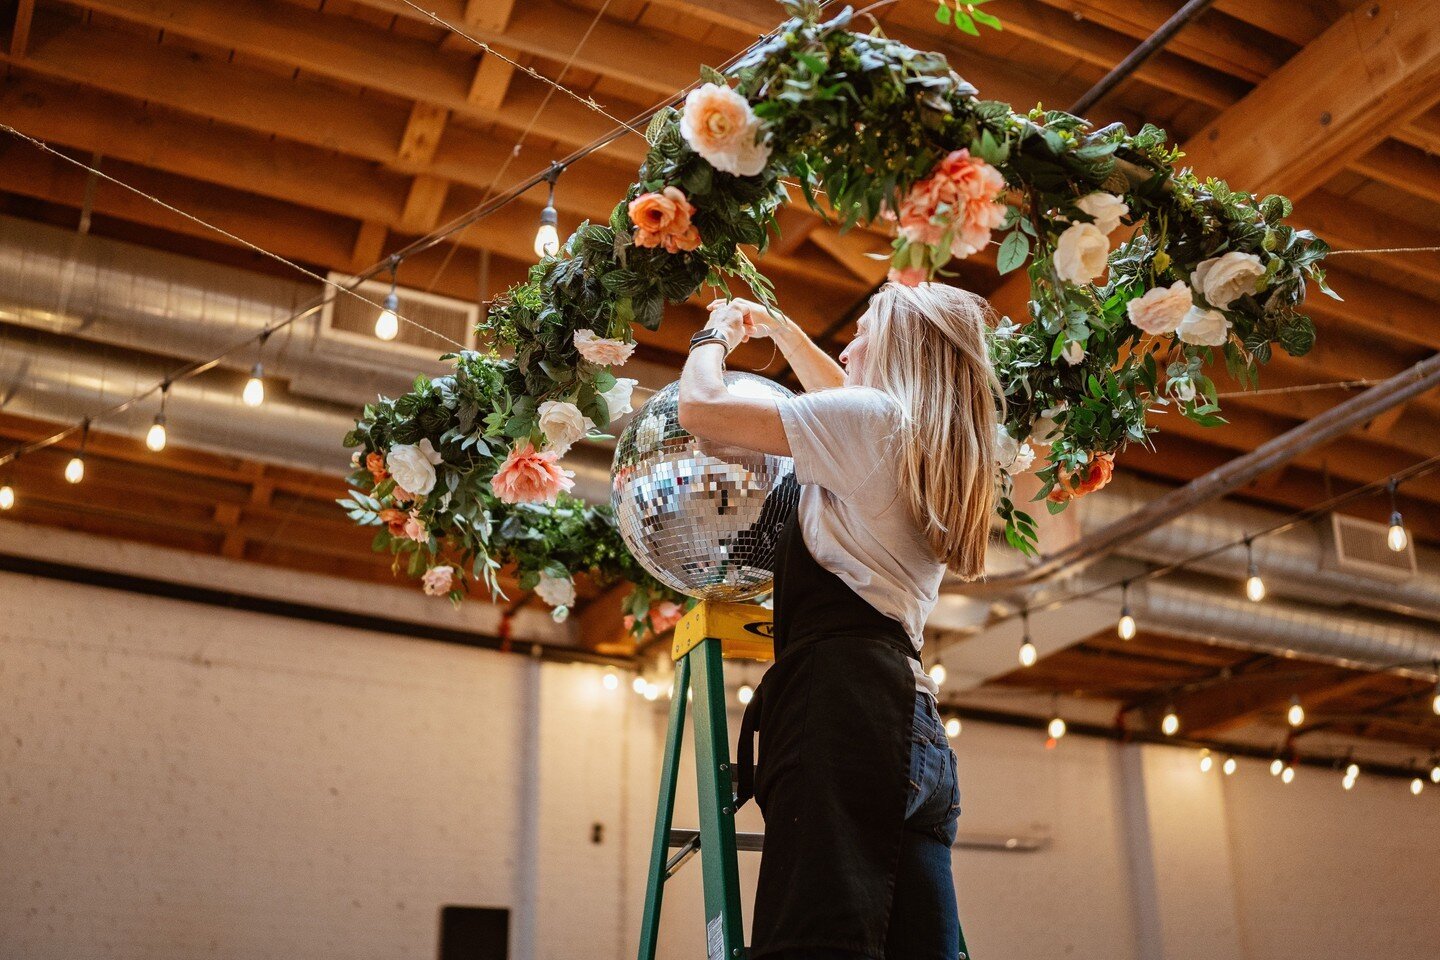 At Flintwood Floral, we offer full delivery and installation! 

Have a big vision? Want a ceiling installment? What about some disco balls? We've got you covered!
&bull;
&bull;
&bull;
&bull;
&bull;
#ceilingflowers #discoballs #flowerstagram #weddingd